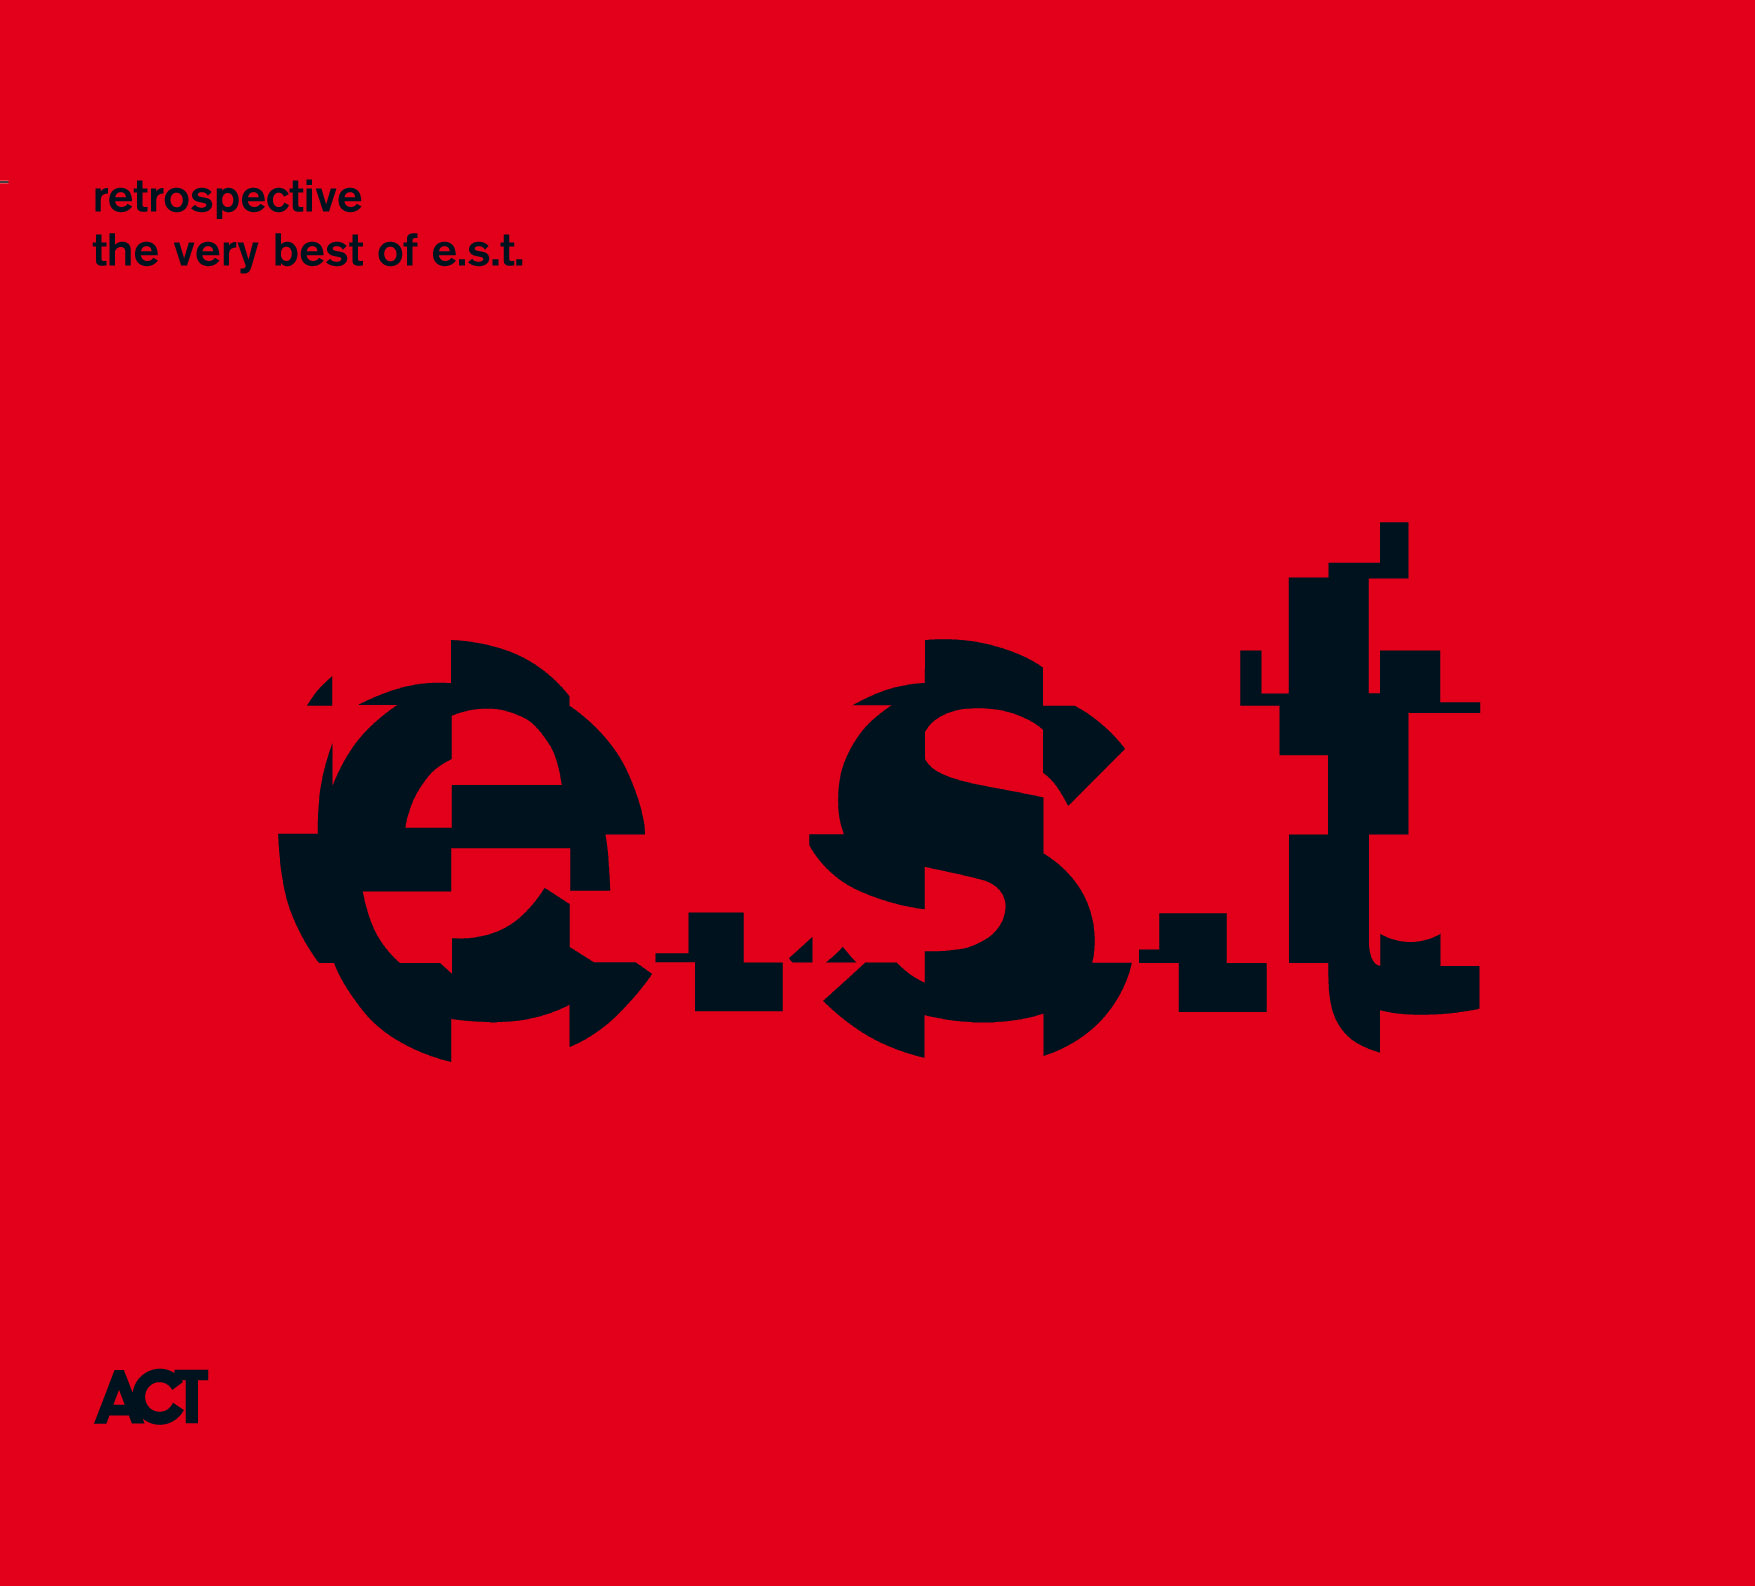 Retrospective - The Very Best Of e.s.t.